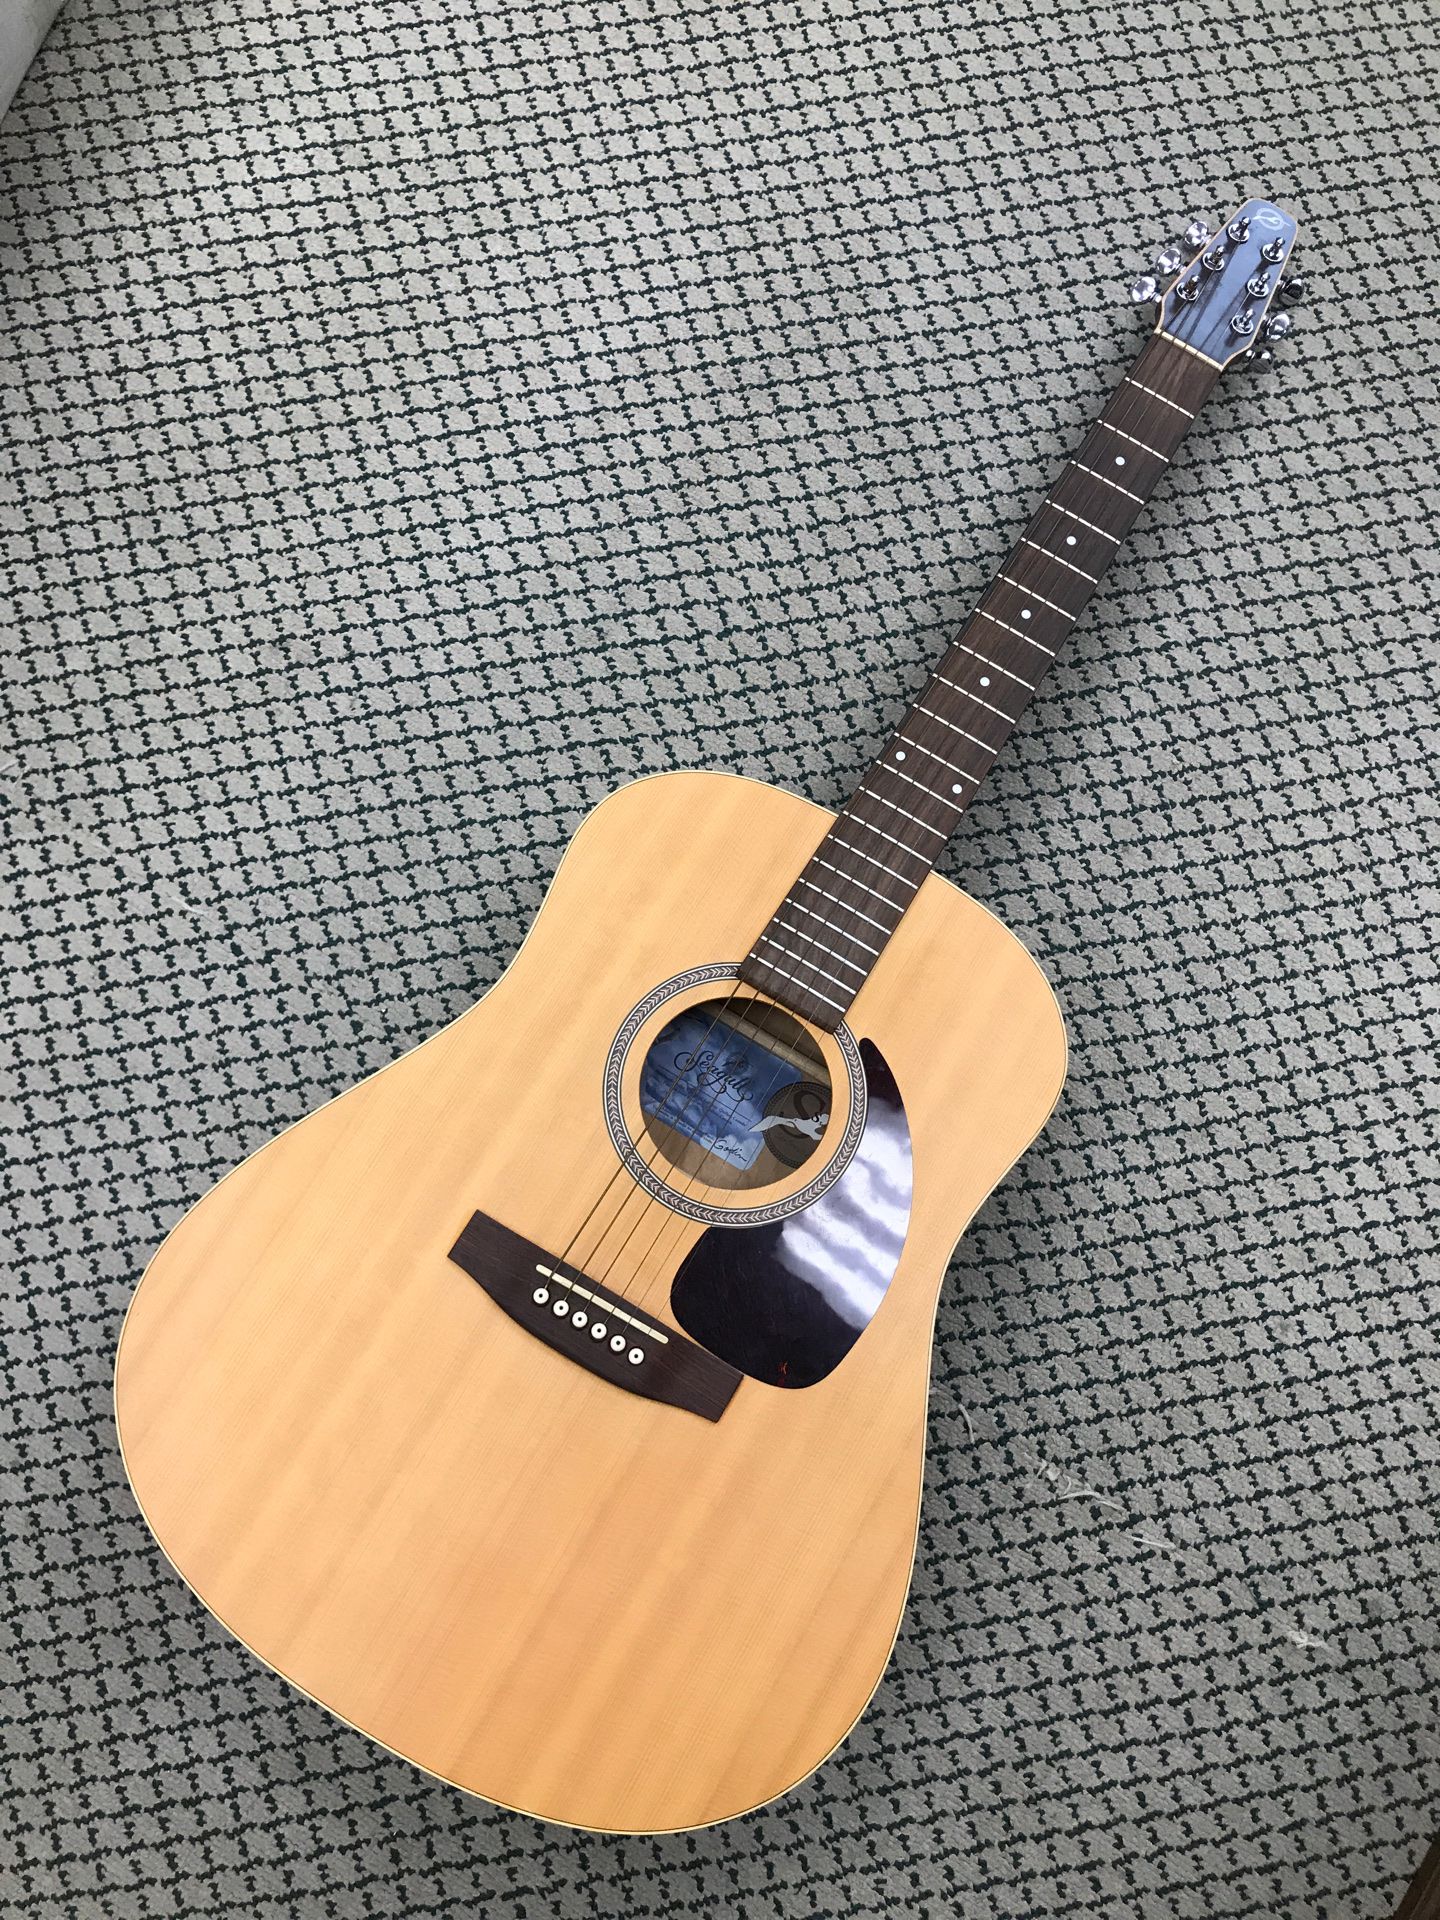 Pristine Seagull S Series Acoustic Electric Guitar